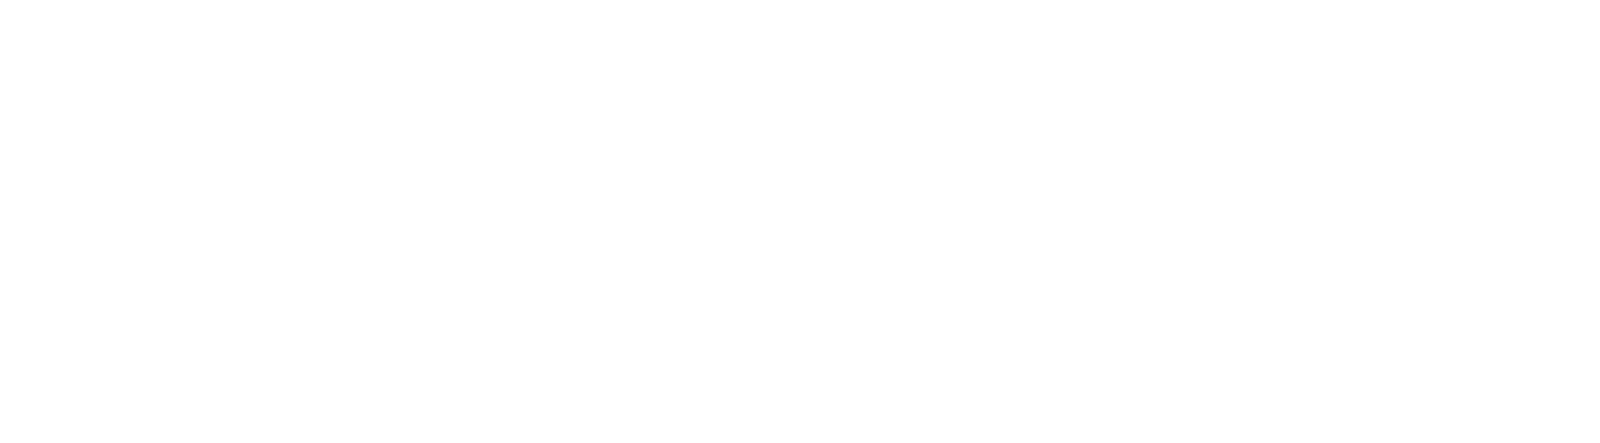 Multiply 2024 Church Planting Conference